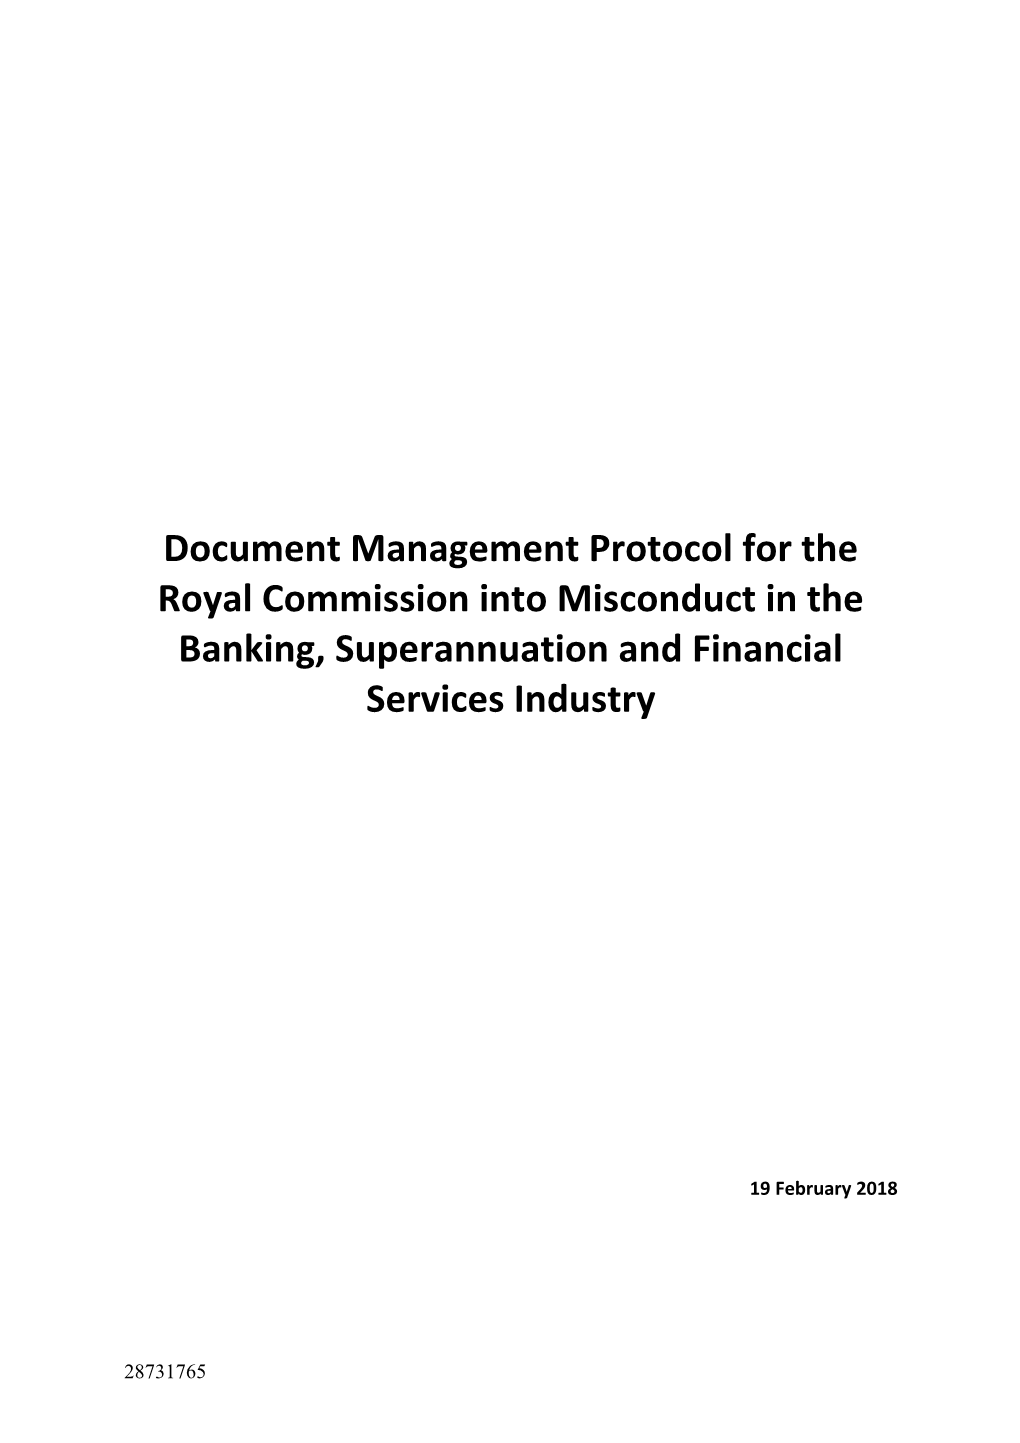 Document Management Protocol for the Royal Commission Into Misconduct in the Banking